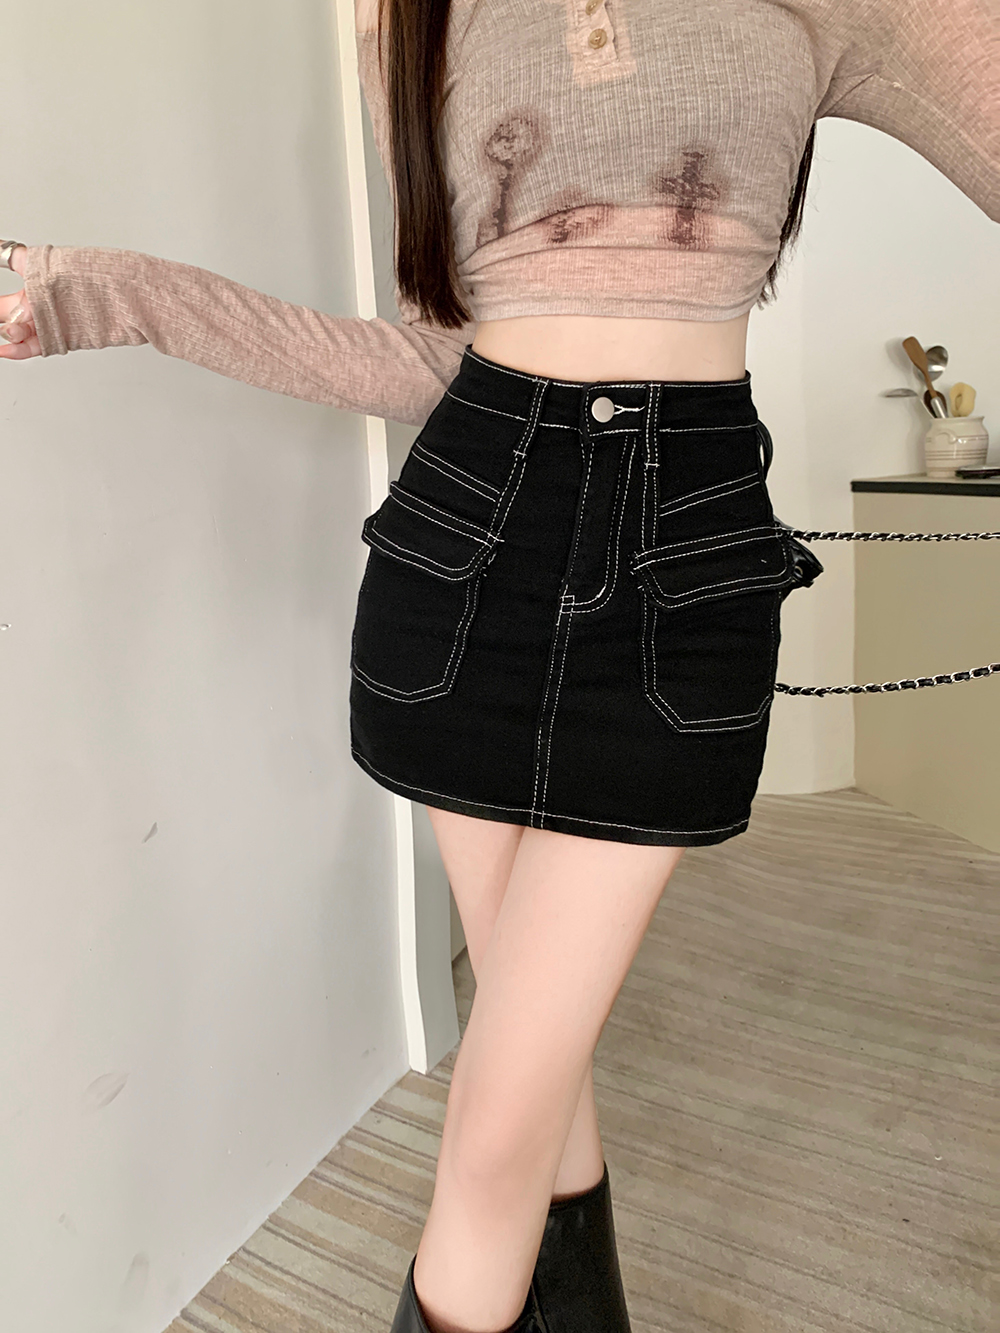 Anti emptied retro skirt A-line work clothing for women